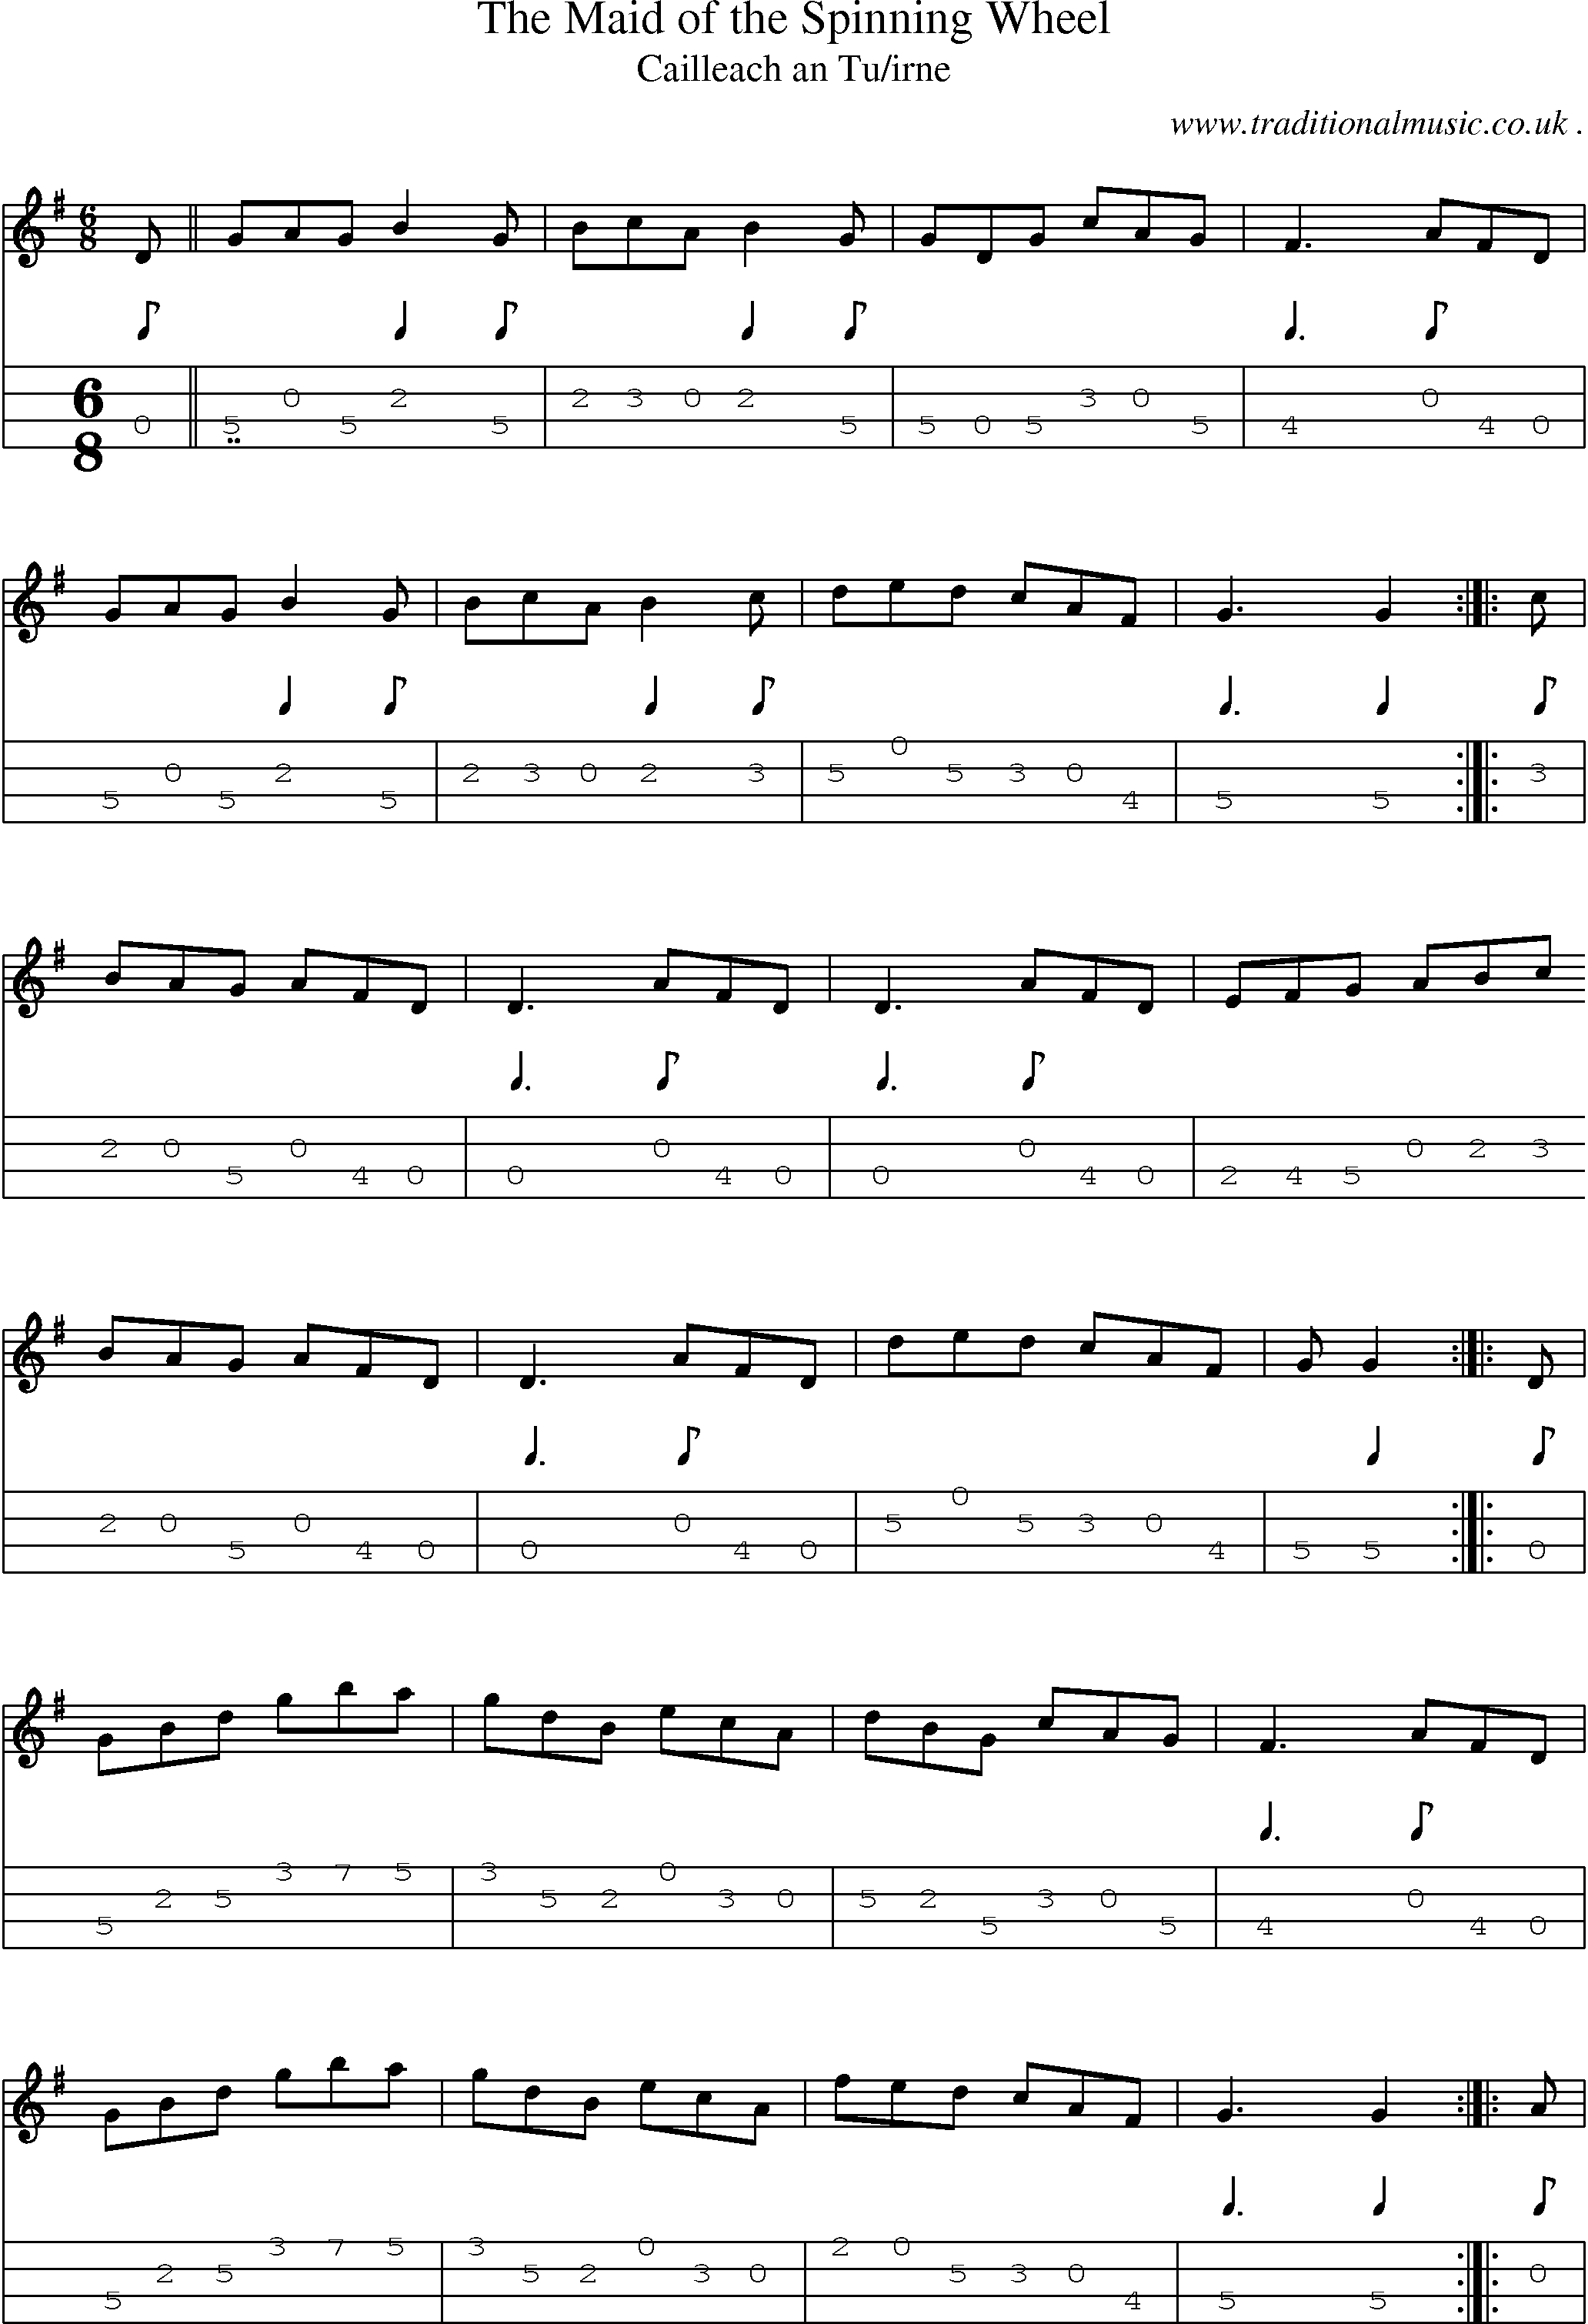 Sheet-Music and Mandolin Tabs for The Maid Of The Spinning Wheel